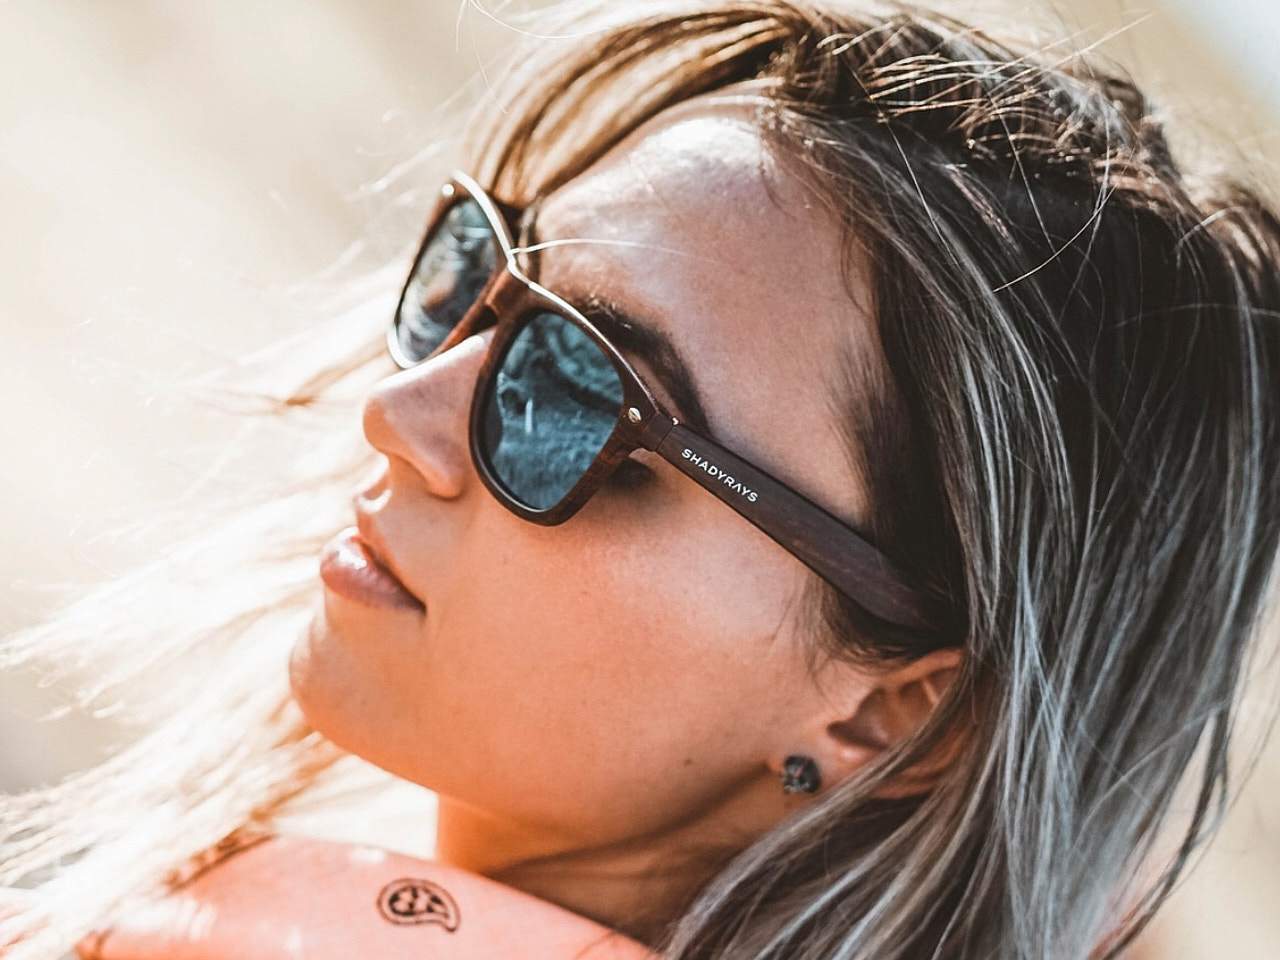 Classic Timber - Black Timber Polarized Sunglasses | Timber Brown Sunglasses | Best Christmas Gifts | Gifts for the Holidays | Unique Gifts for